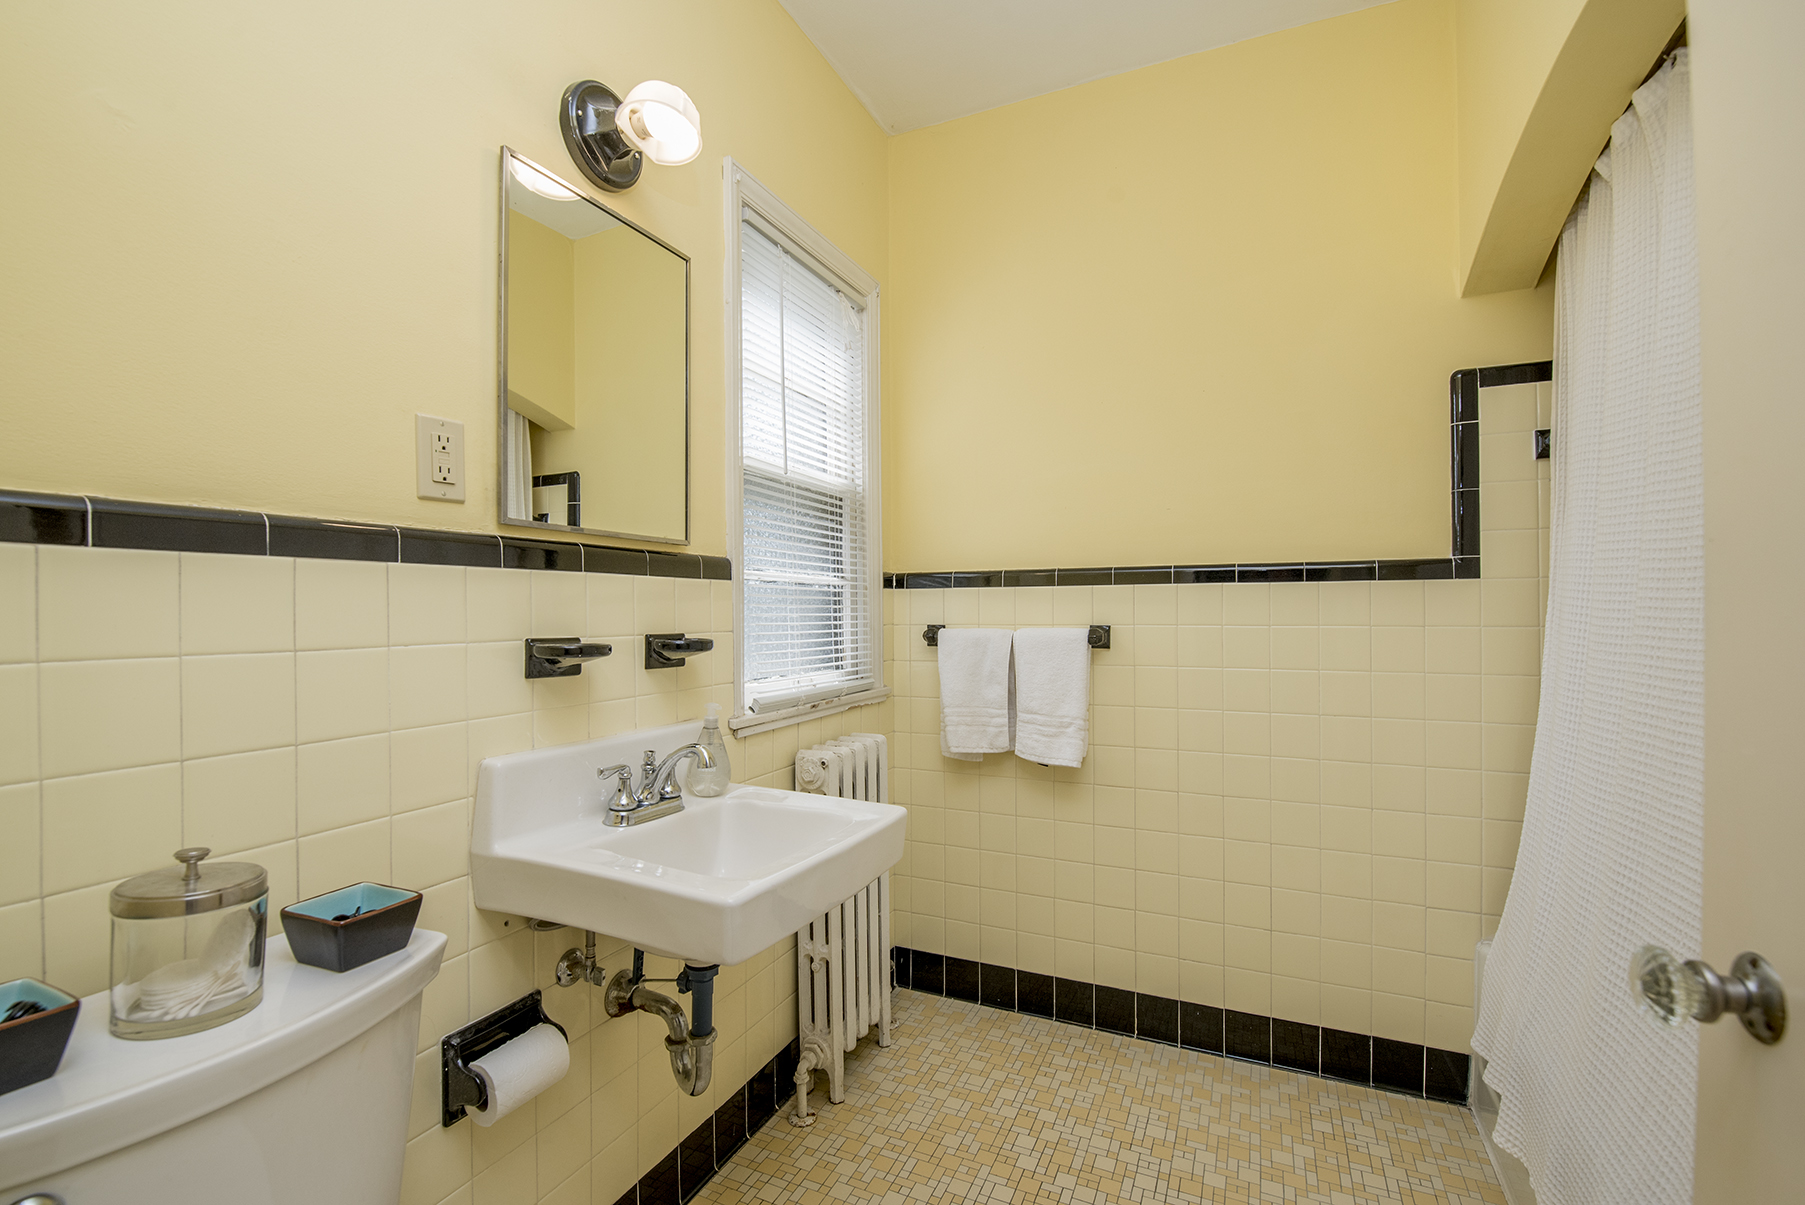 Period-specific finishes have been restored in the bathroom.